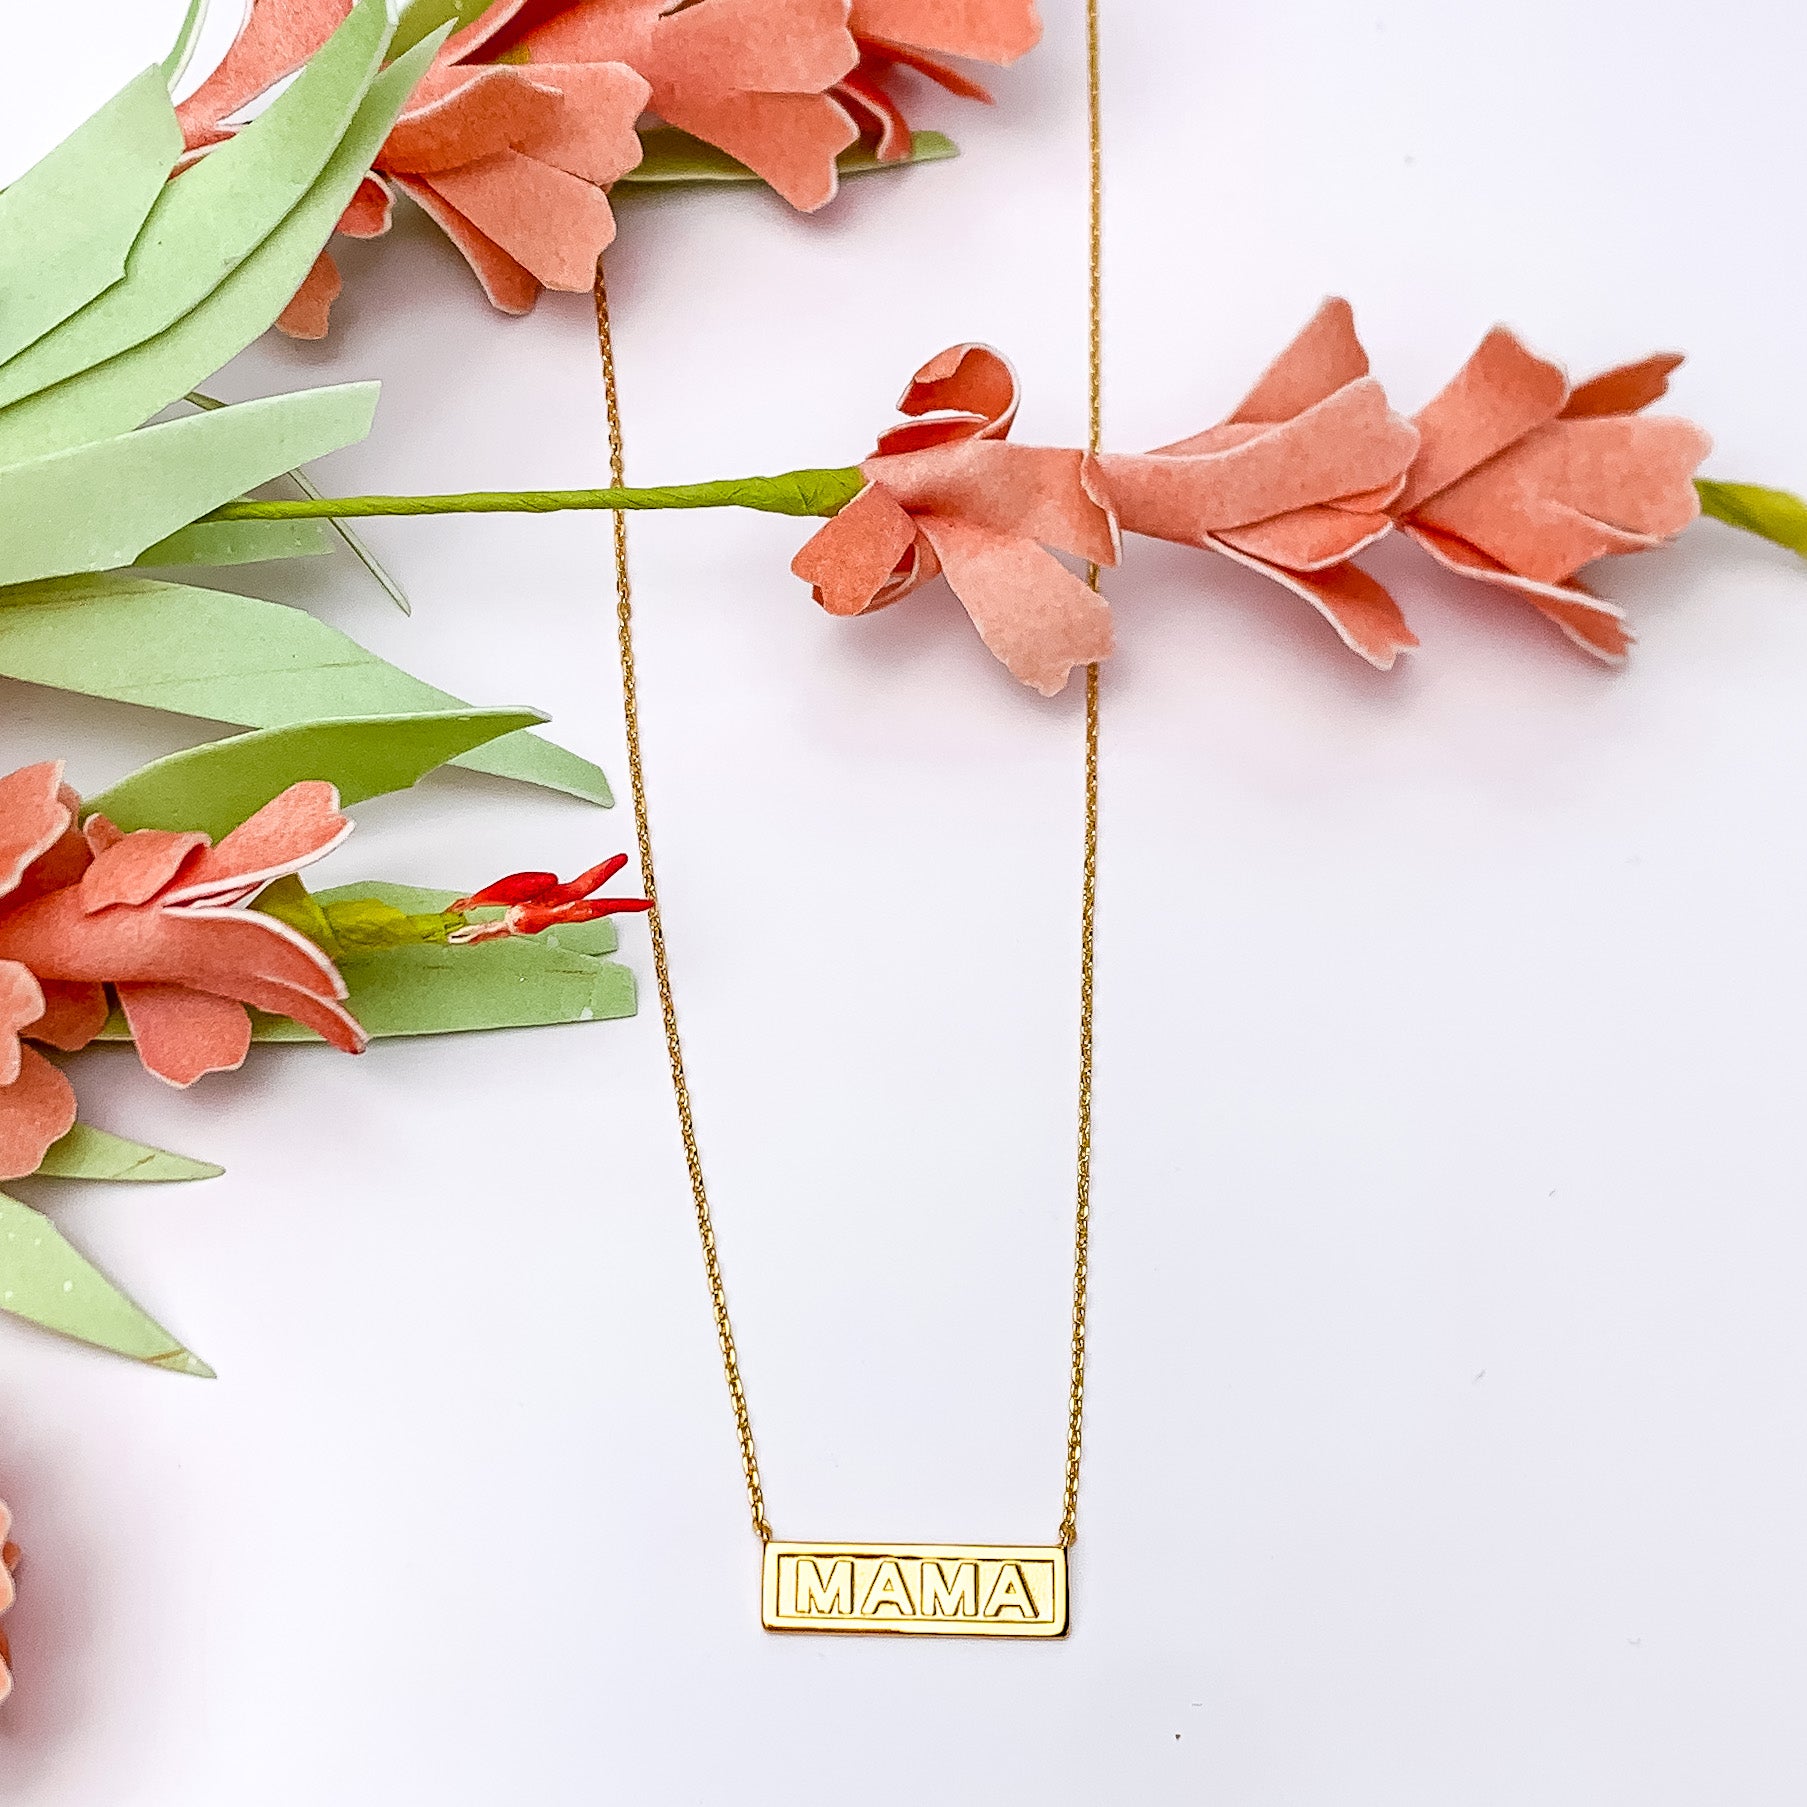 Gold tone mama plaque necklace. Pictured on a white background with flowers at the left side through the screen.